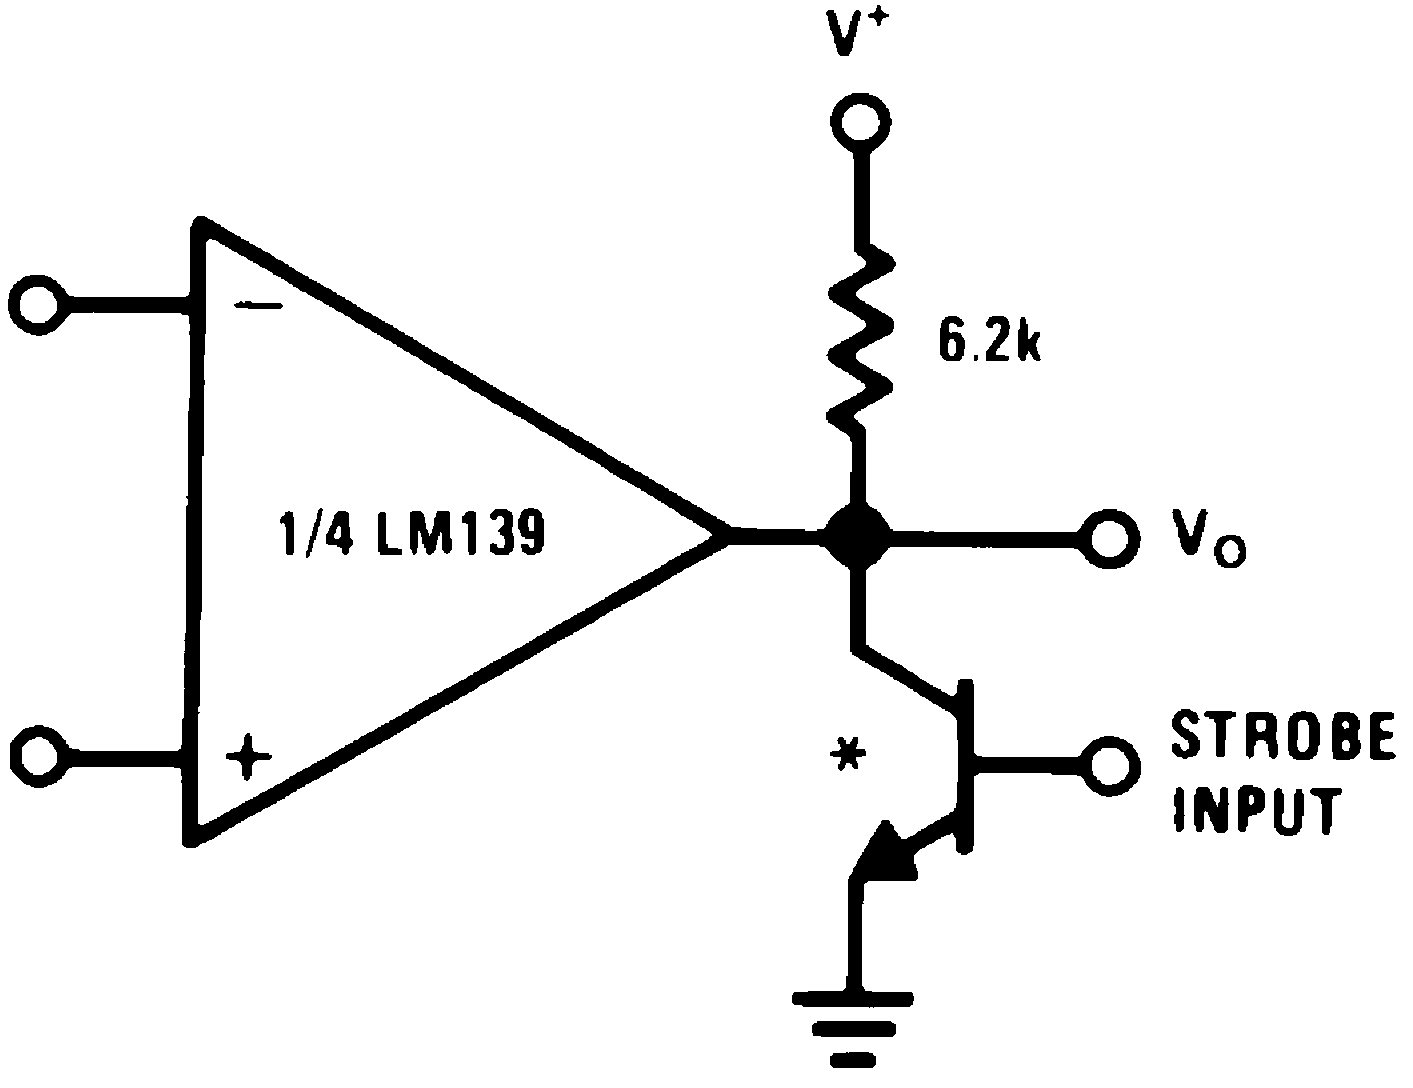 LM339-MIL lm339-mil-output-strobing-schematic.png